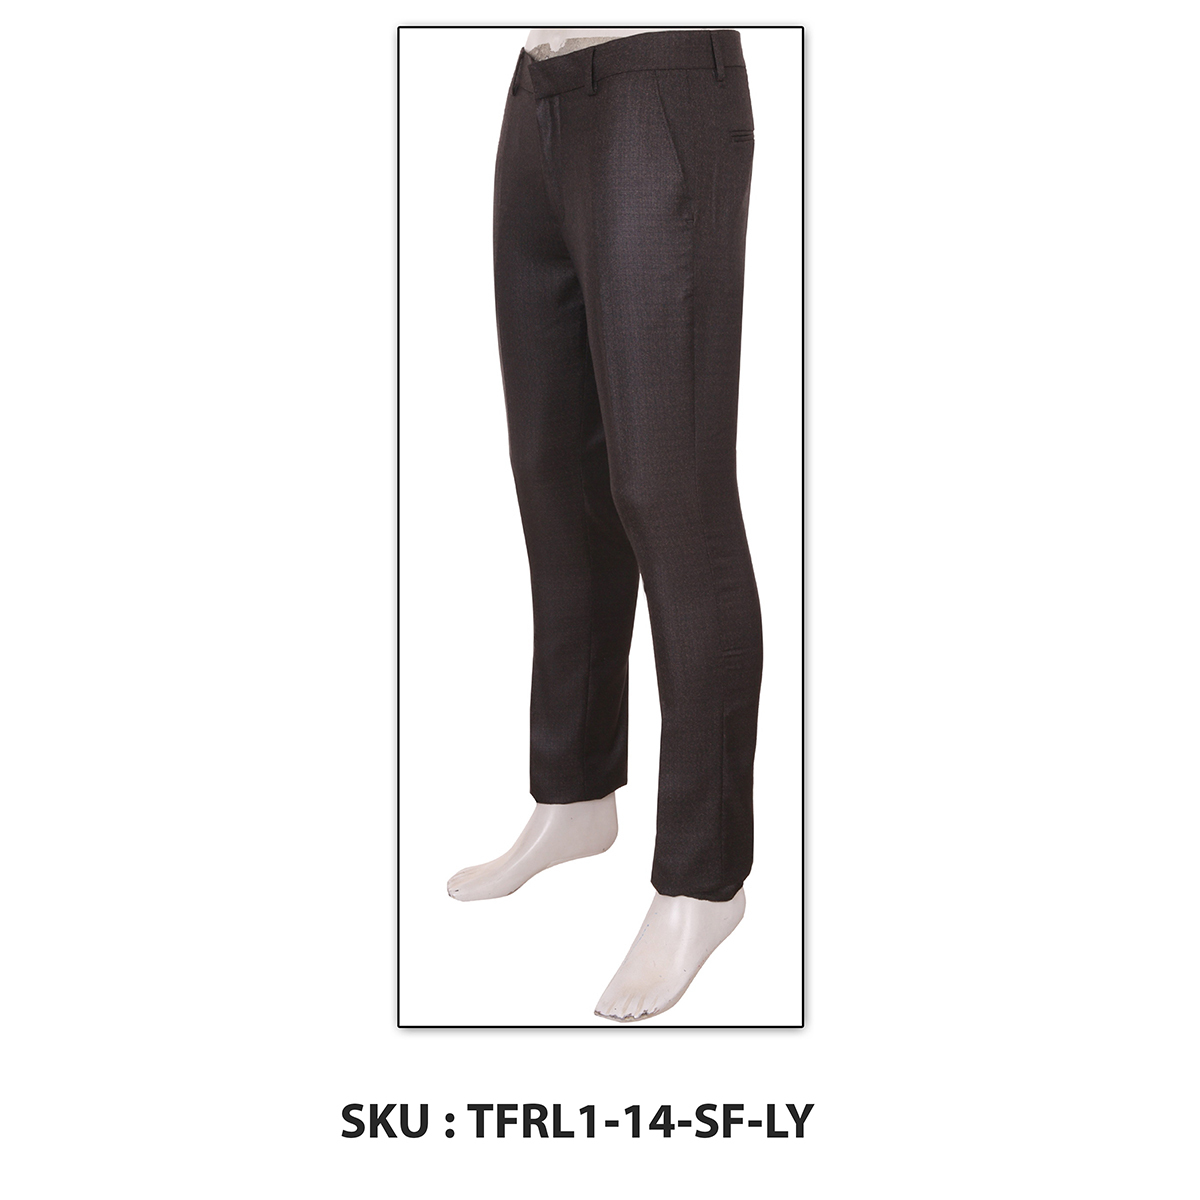 Classic Polo Mens Trousers Tfrl1-14-Sf-Ly Brown 30